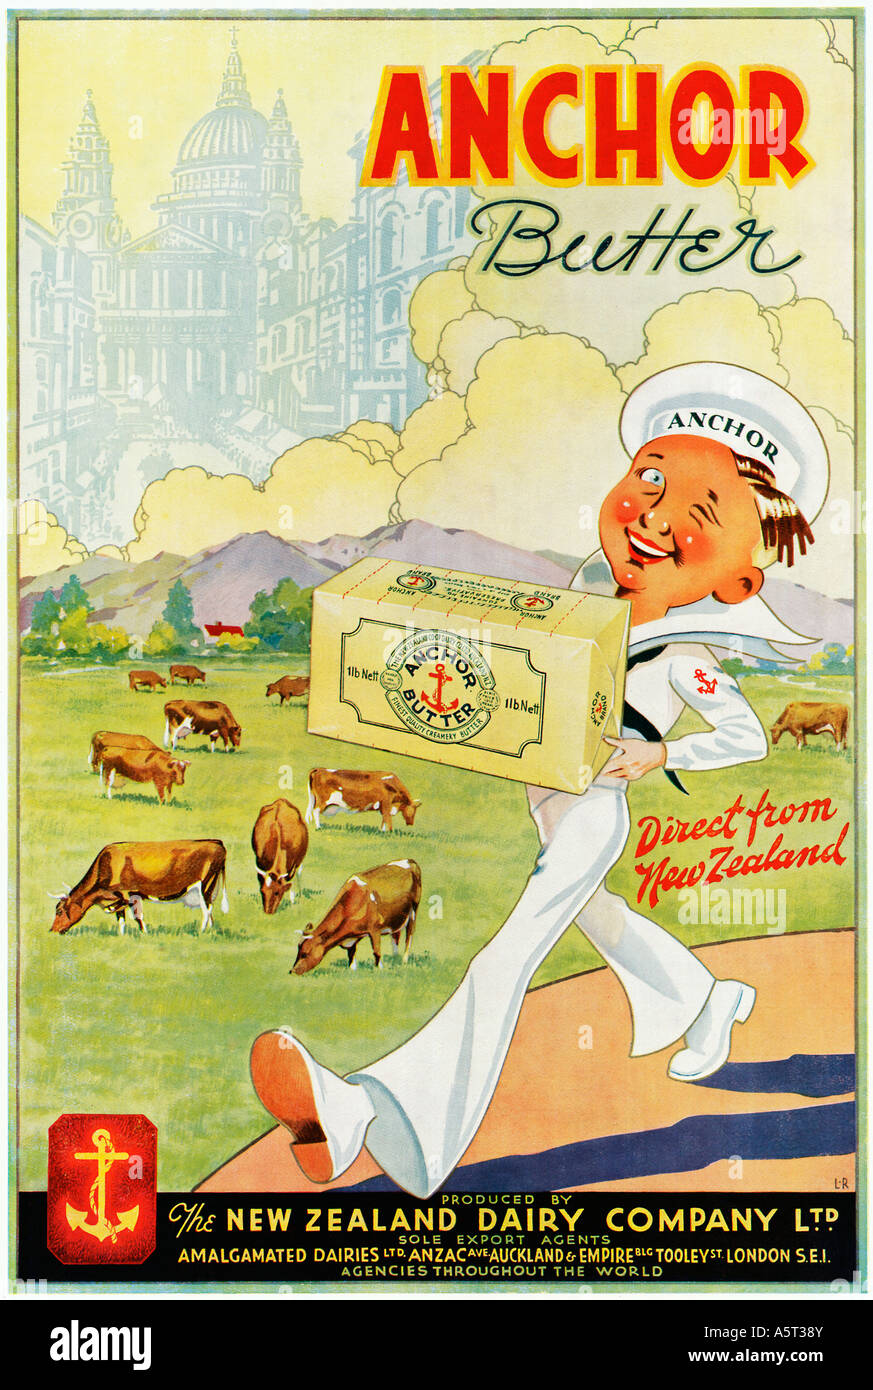 Anchor Butter 1935 advert for the produce of the New Zealand Dairy Company for export Throughout The World Stock Photo